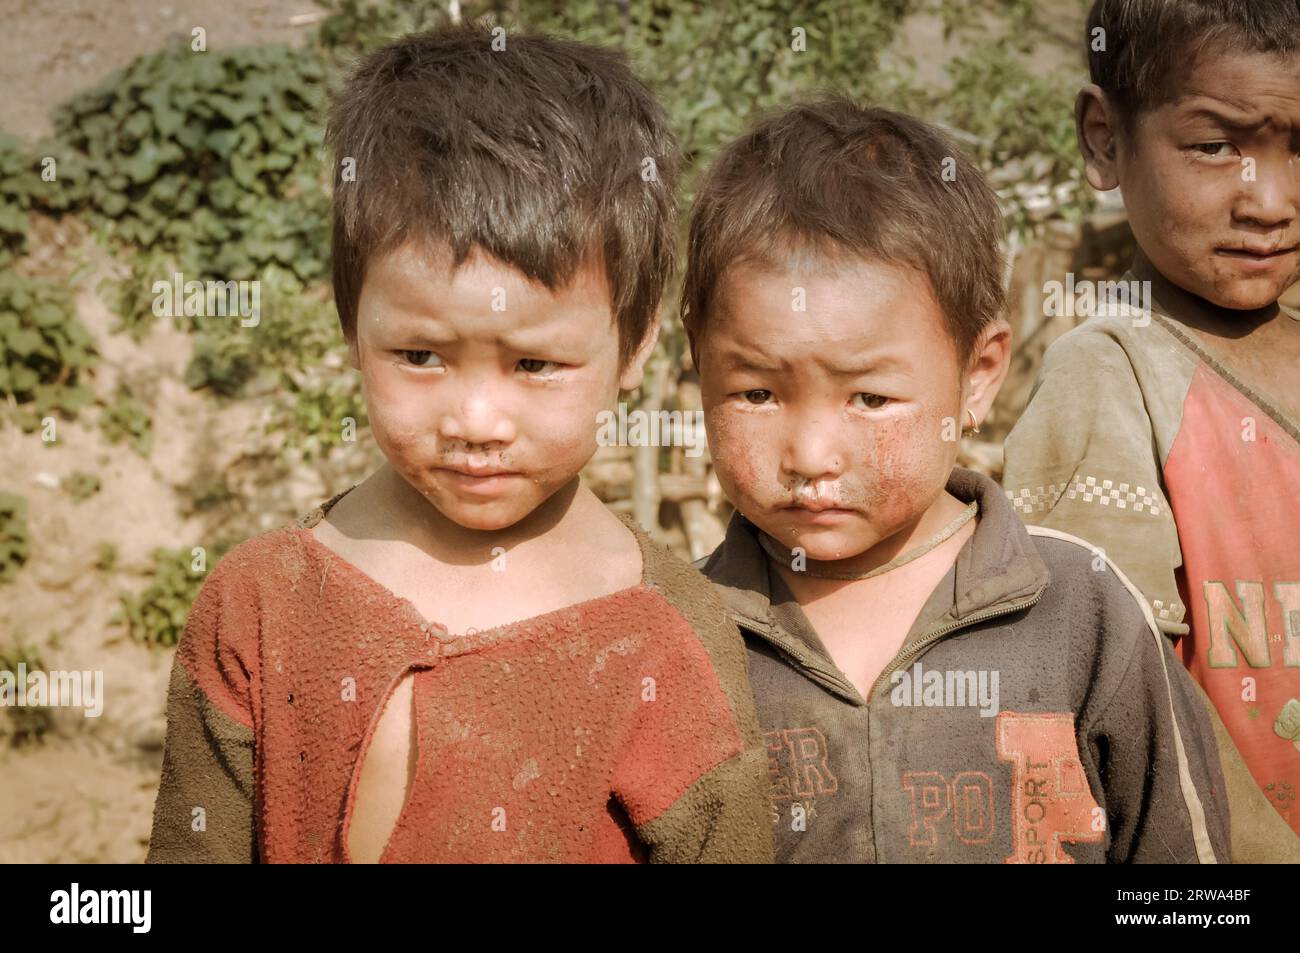 Dolpo, Nepal, circa May 2012: Brown-haired girl and two boys pose and frown to photocamera with dirt on their faces and clothes in Dolpo, Nepal. Stock Photo